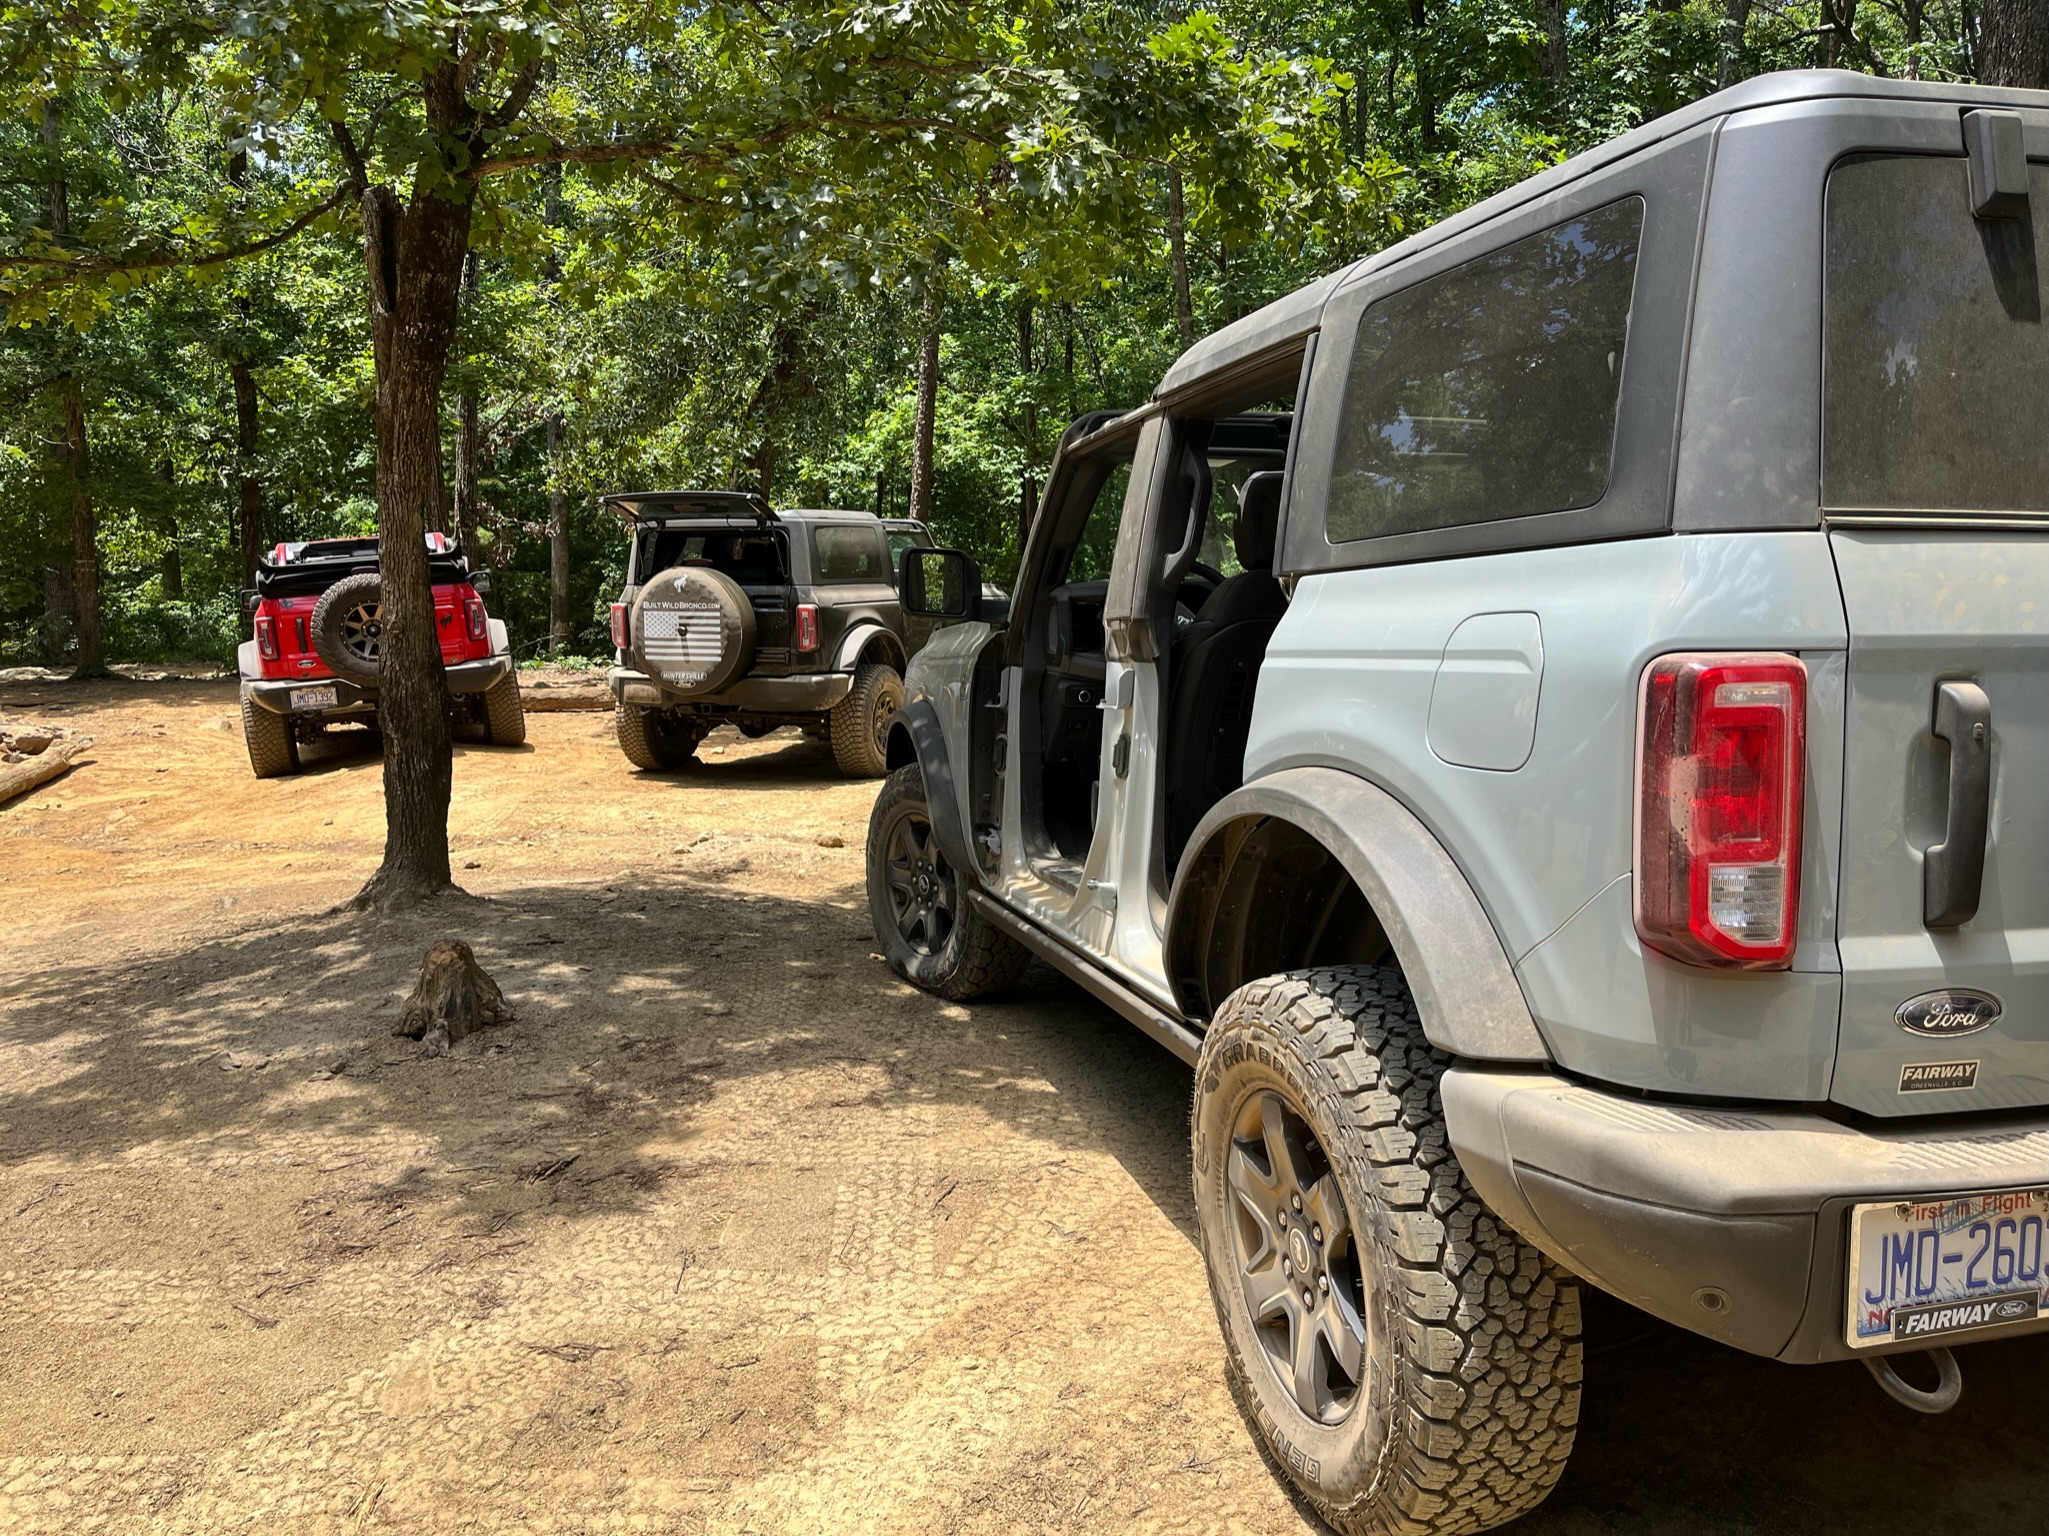 Ford Bronco Biggest Bronco day at Uwharrie National Forest yet 981904DF-4A7B-4B21-810C-7AAE3218637E